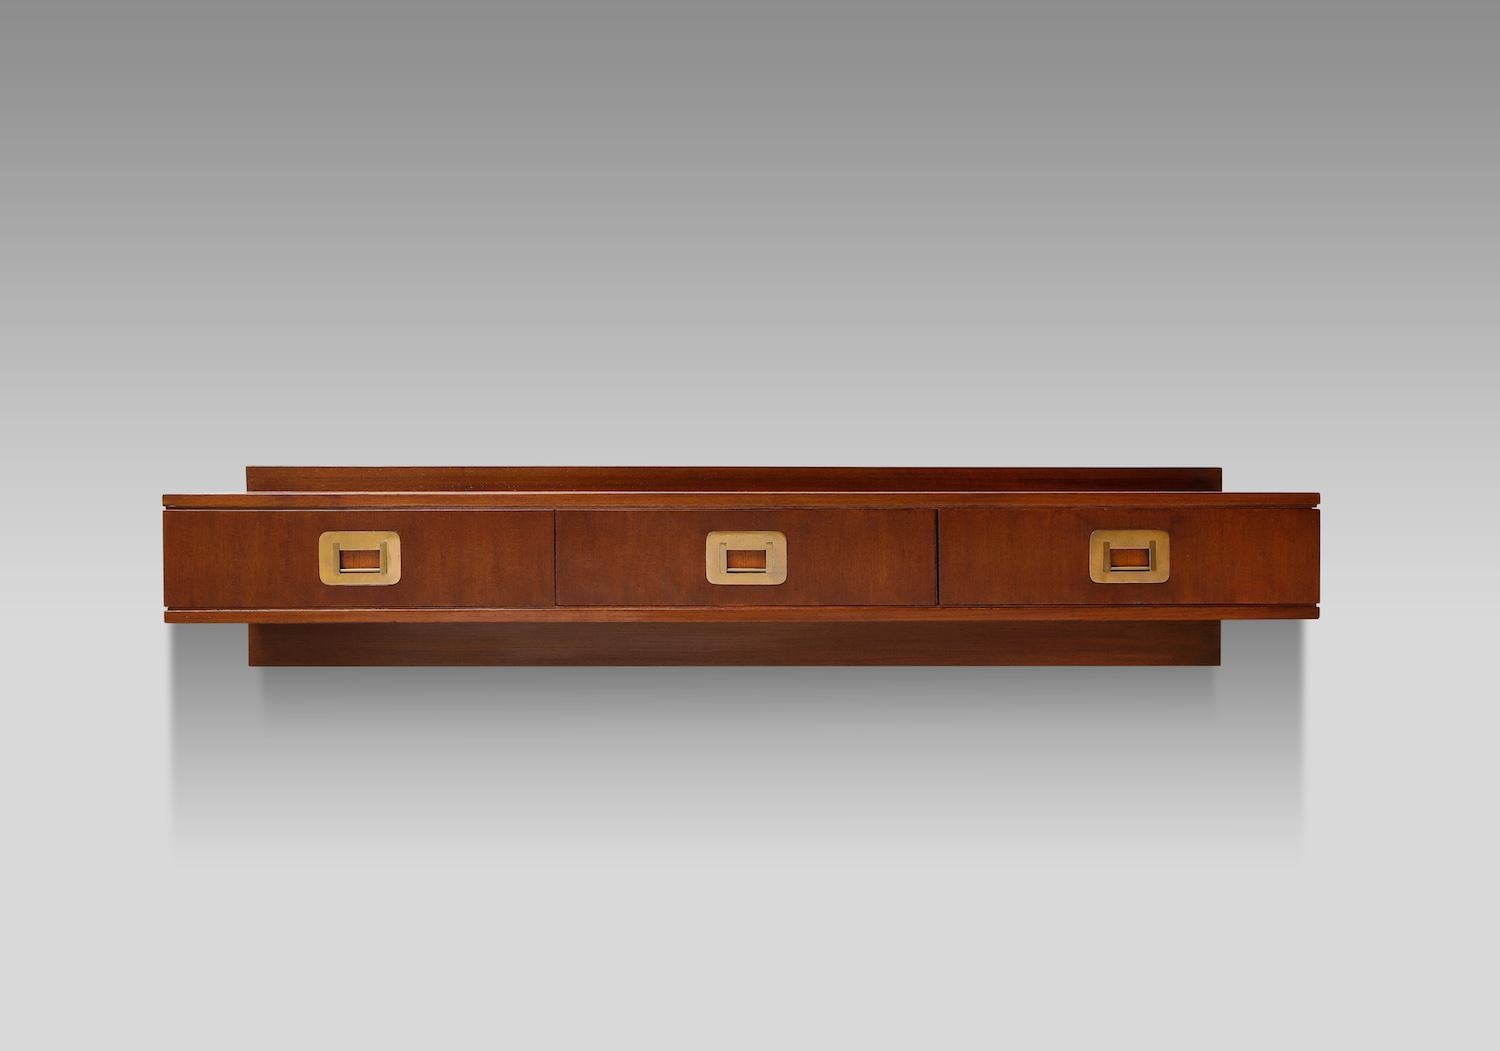 Custom wall-mounted console by Ico Parisi. Sleek wall-mounted console table of mahogany with 3 drawers and great brass hardware. From a custom commission, produced by Brugnoli, Cantú. This piece has been authenticated by the Archivio Ico Parisi.